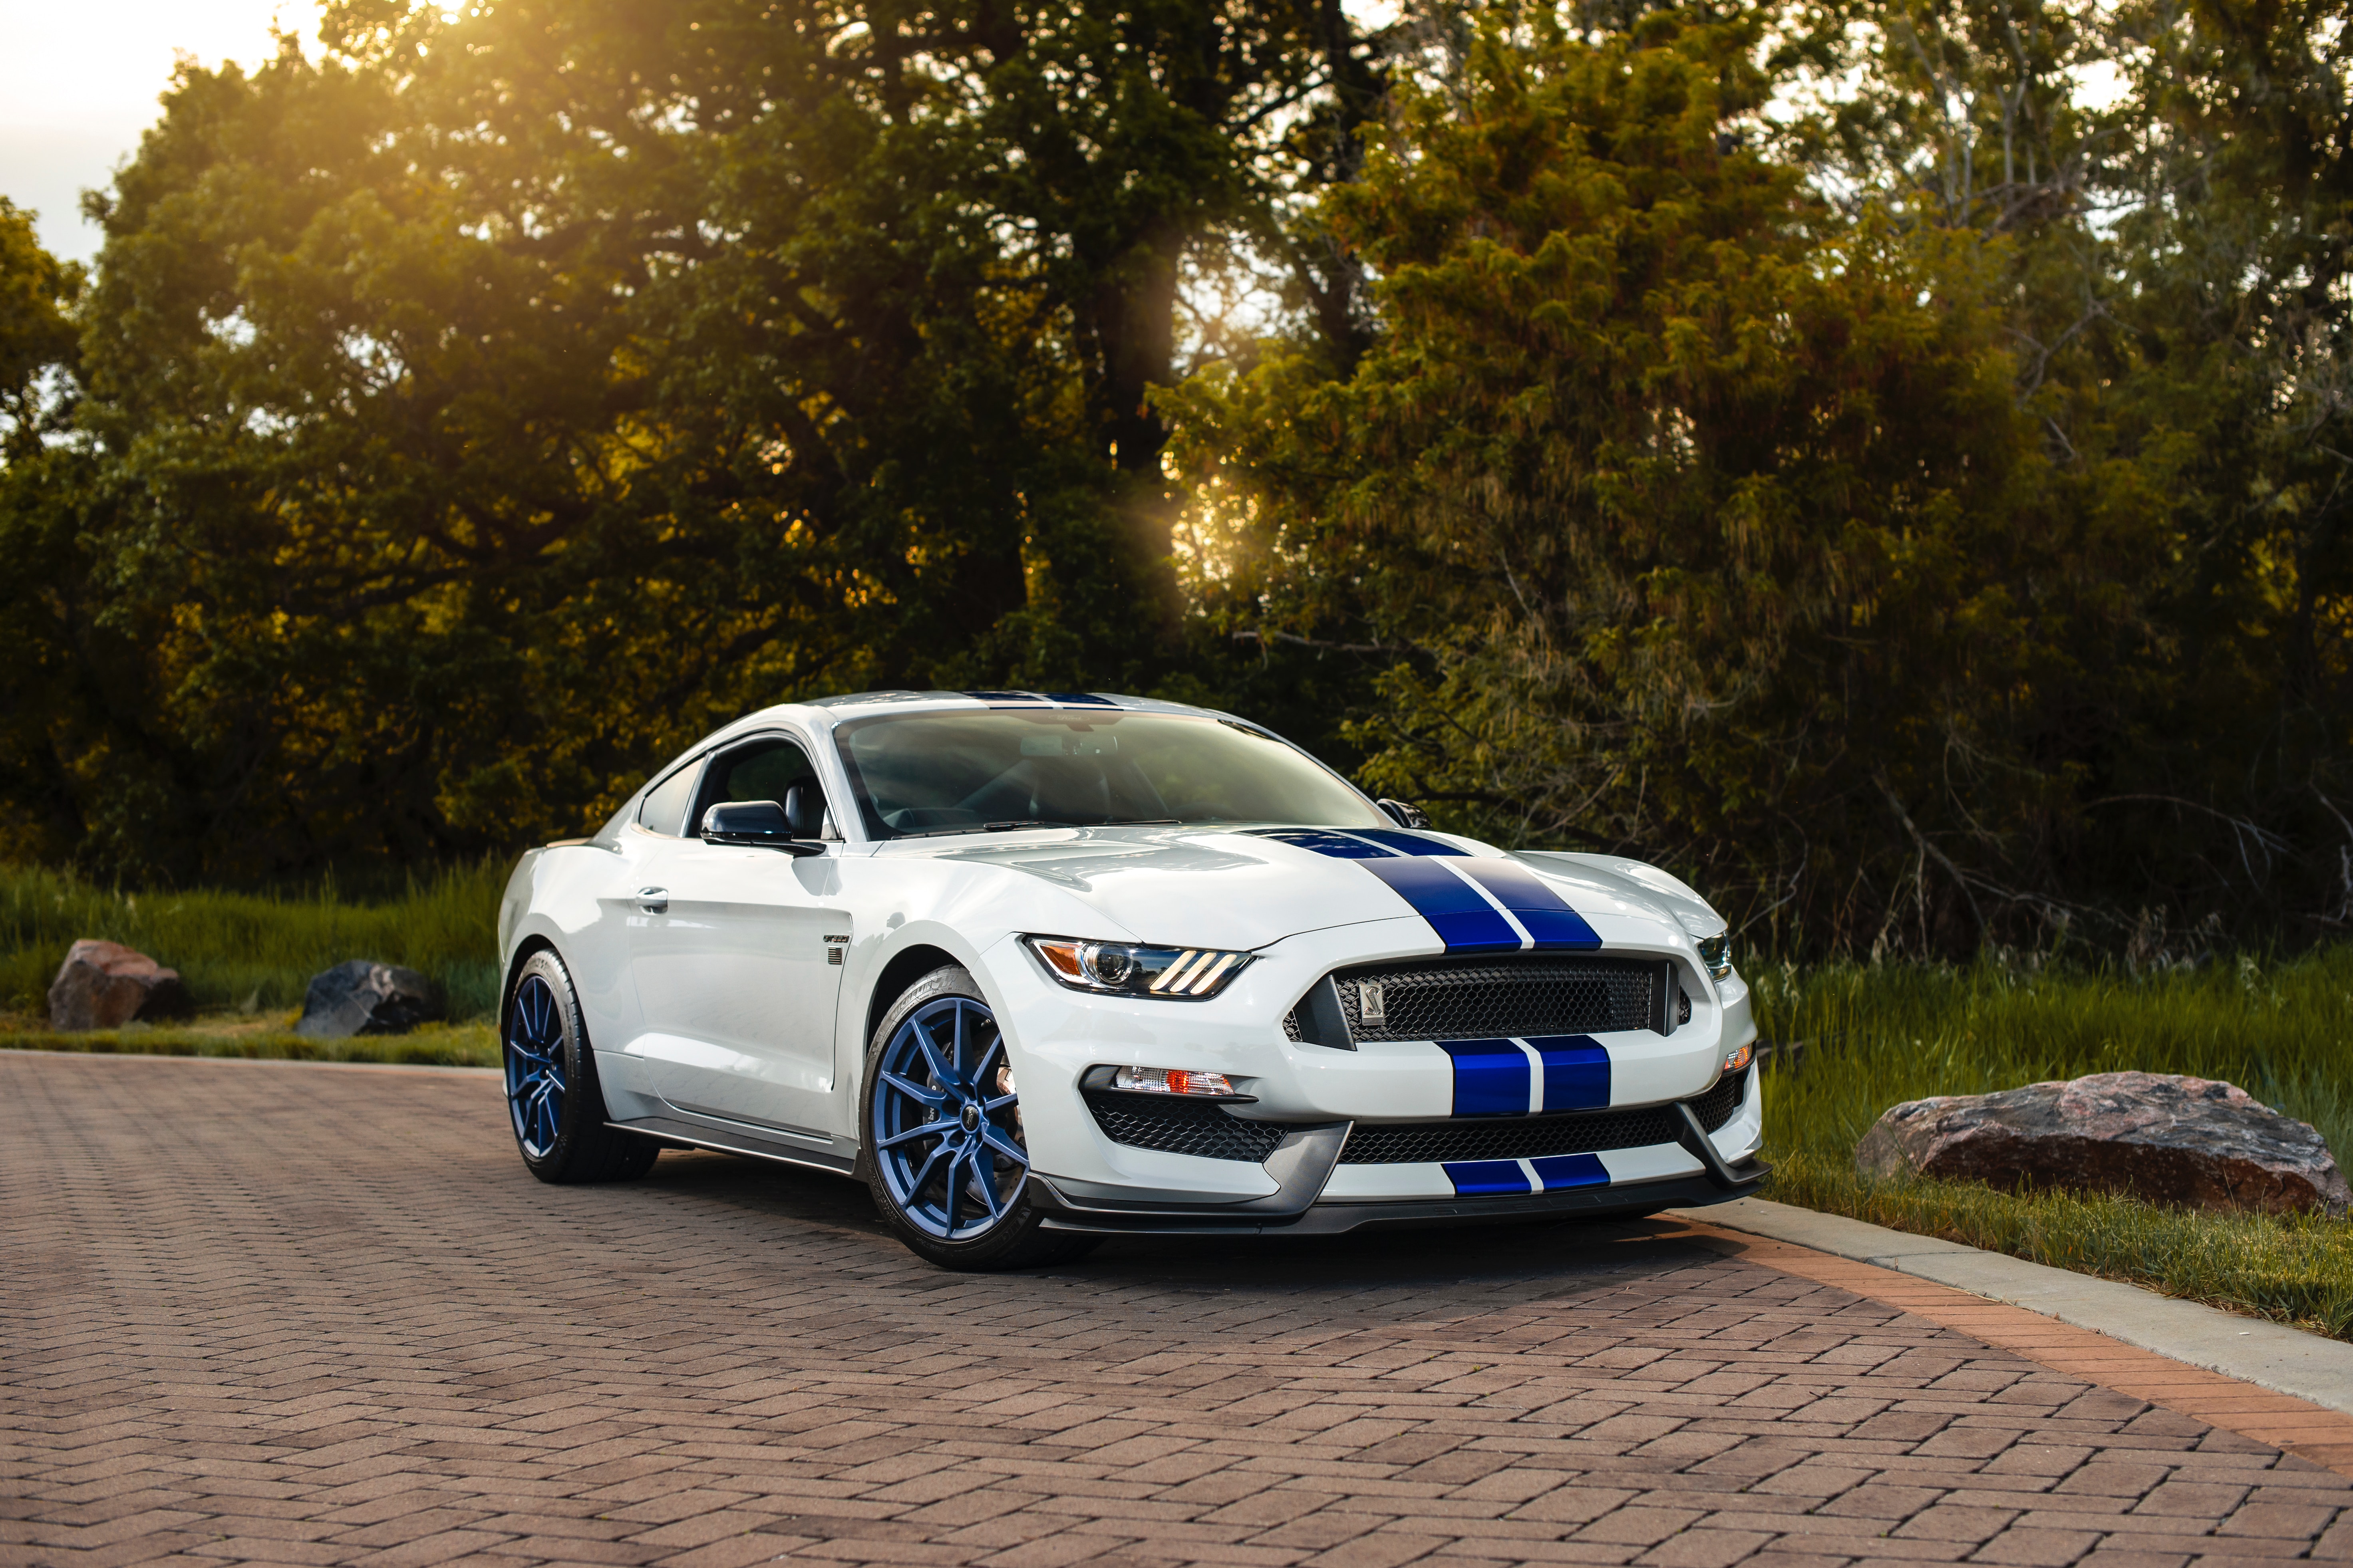 ford, sports, cars, white, car, machine, sports car, side view, ford mustang gt350